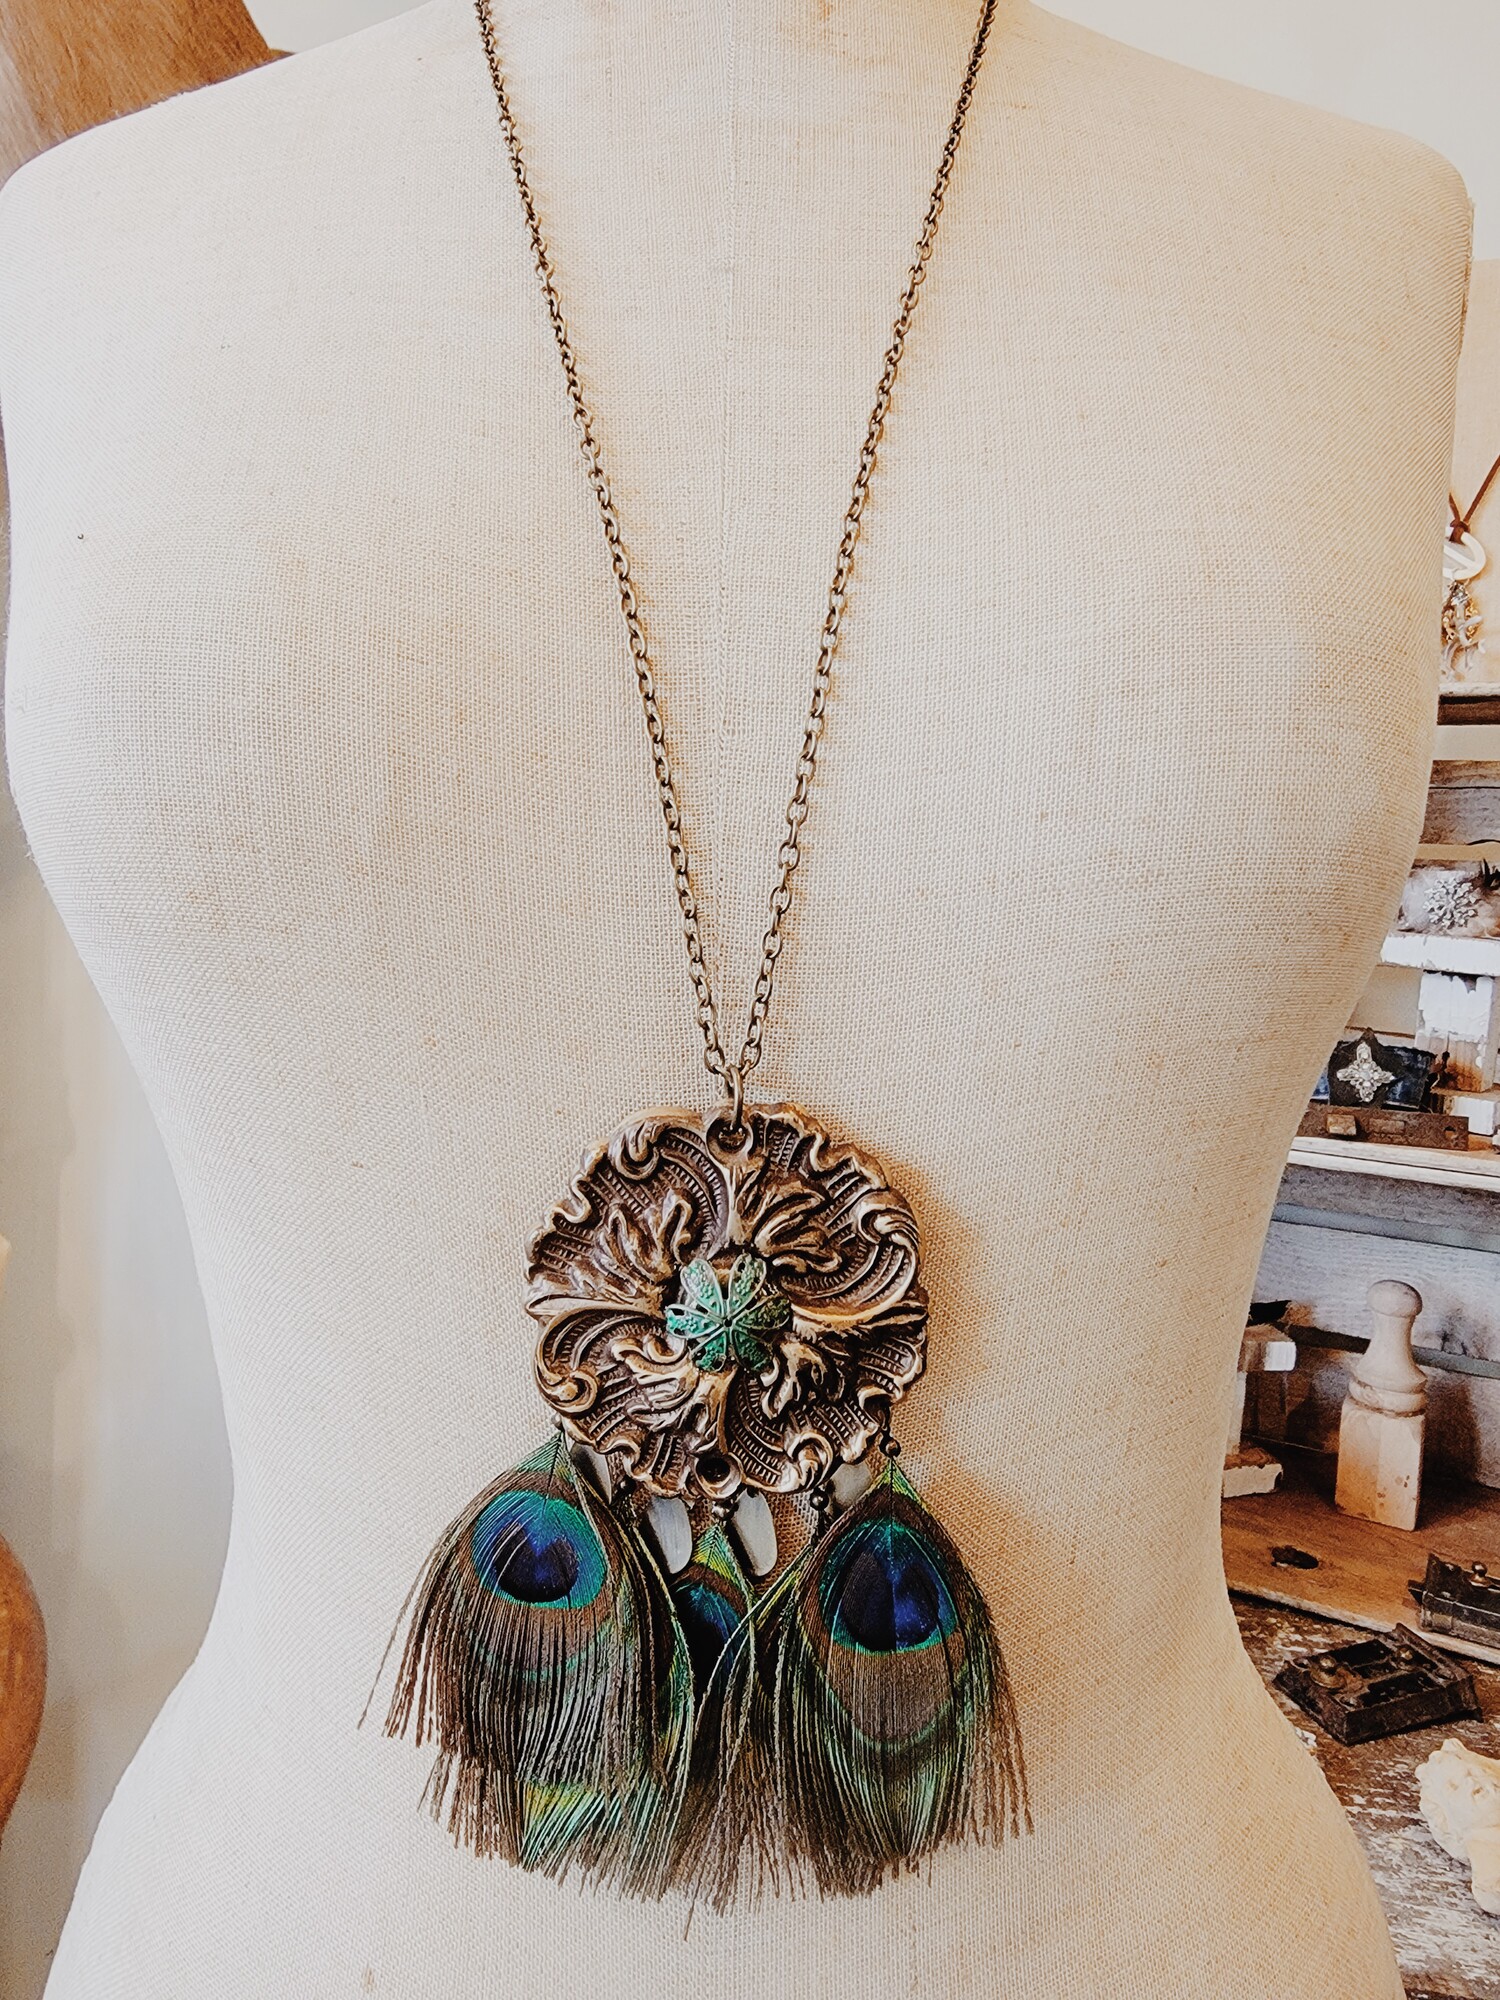 This beautiful necklace was hand crafted! The artist used a vintage floral medallion for the pendant and attached faux peacock feathers.
Chain: 32 Inches